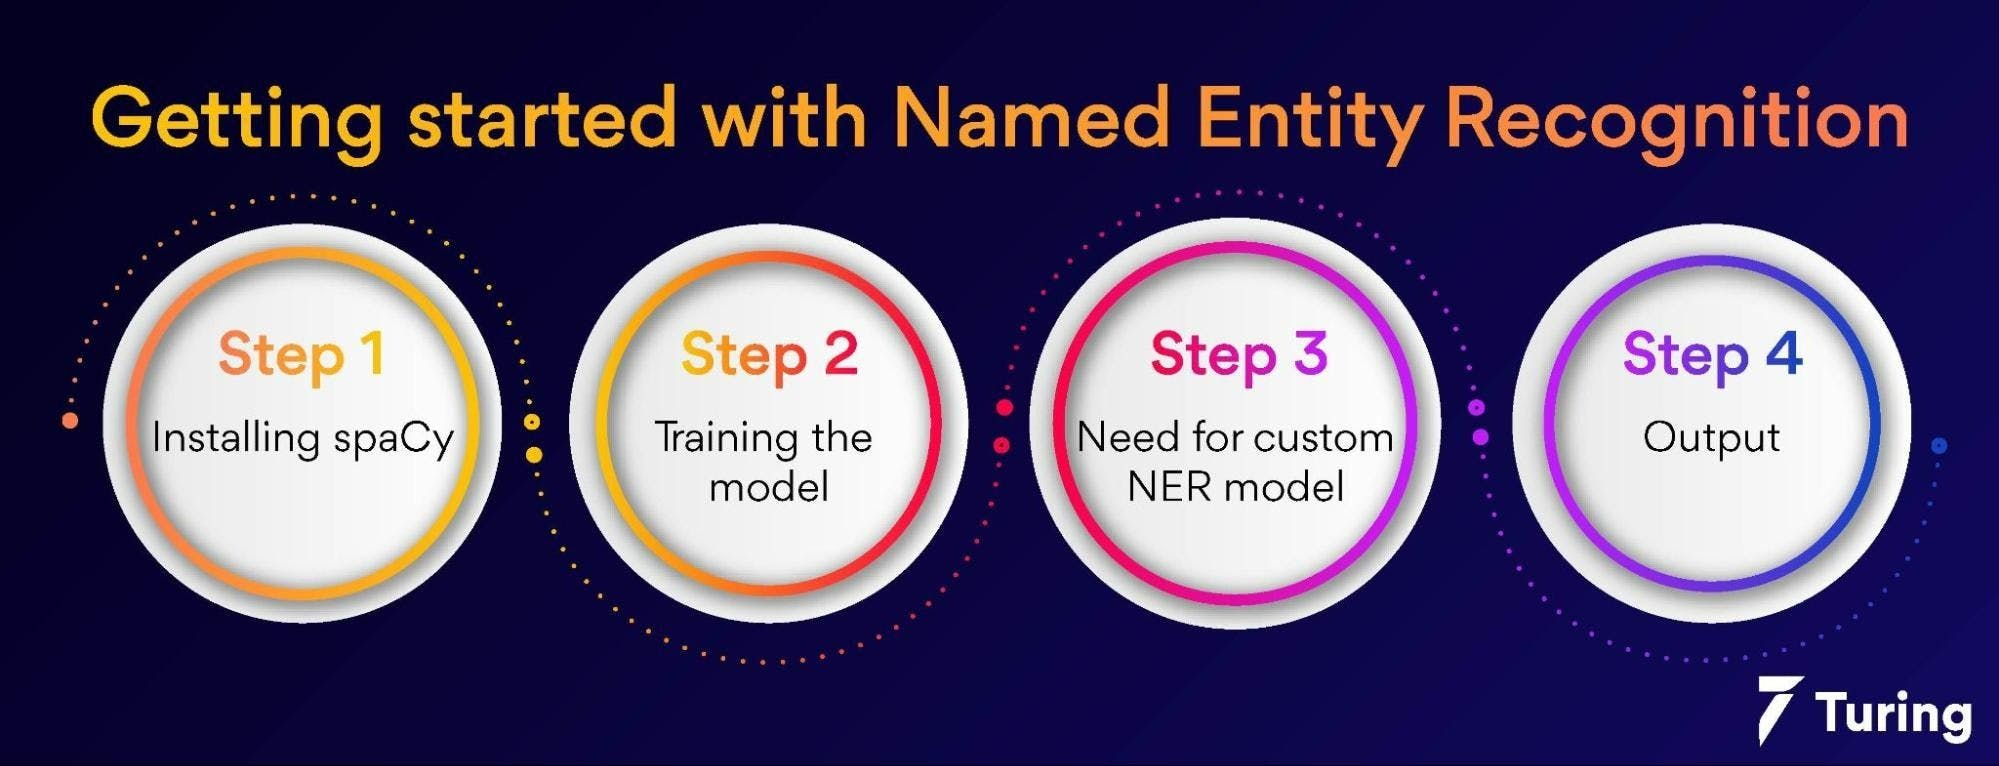 Getting started with Named Entity Recognition.webp